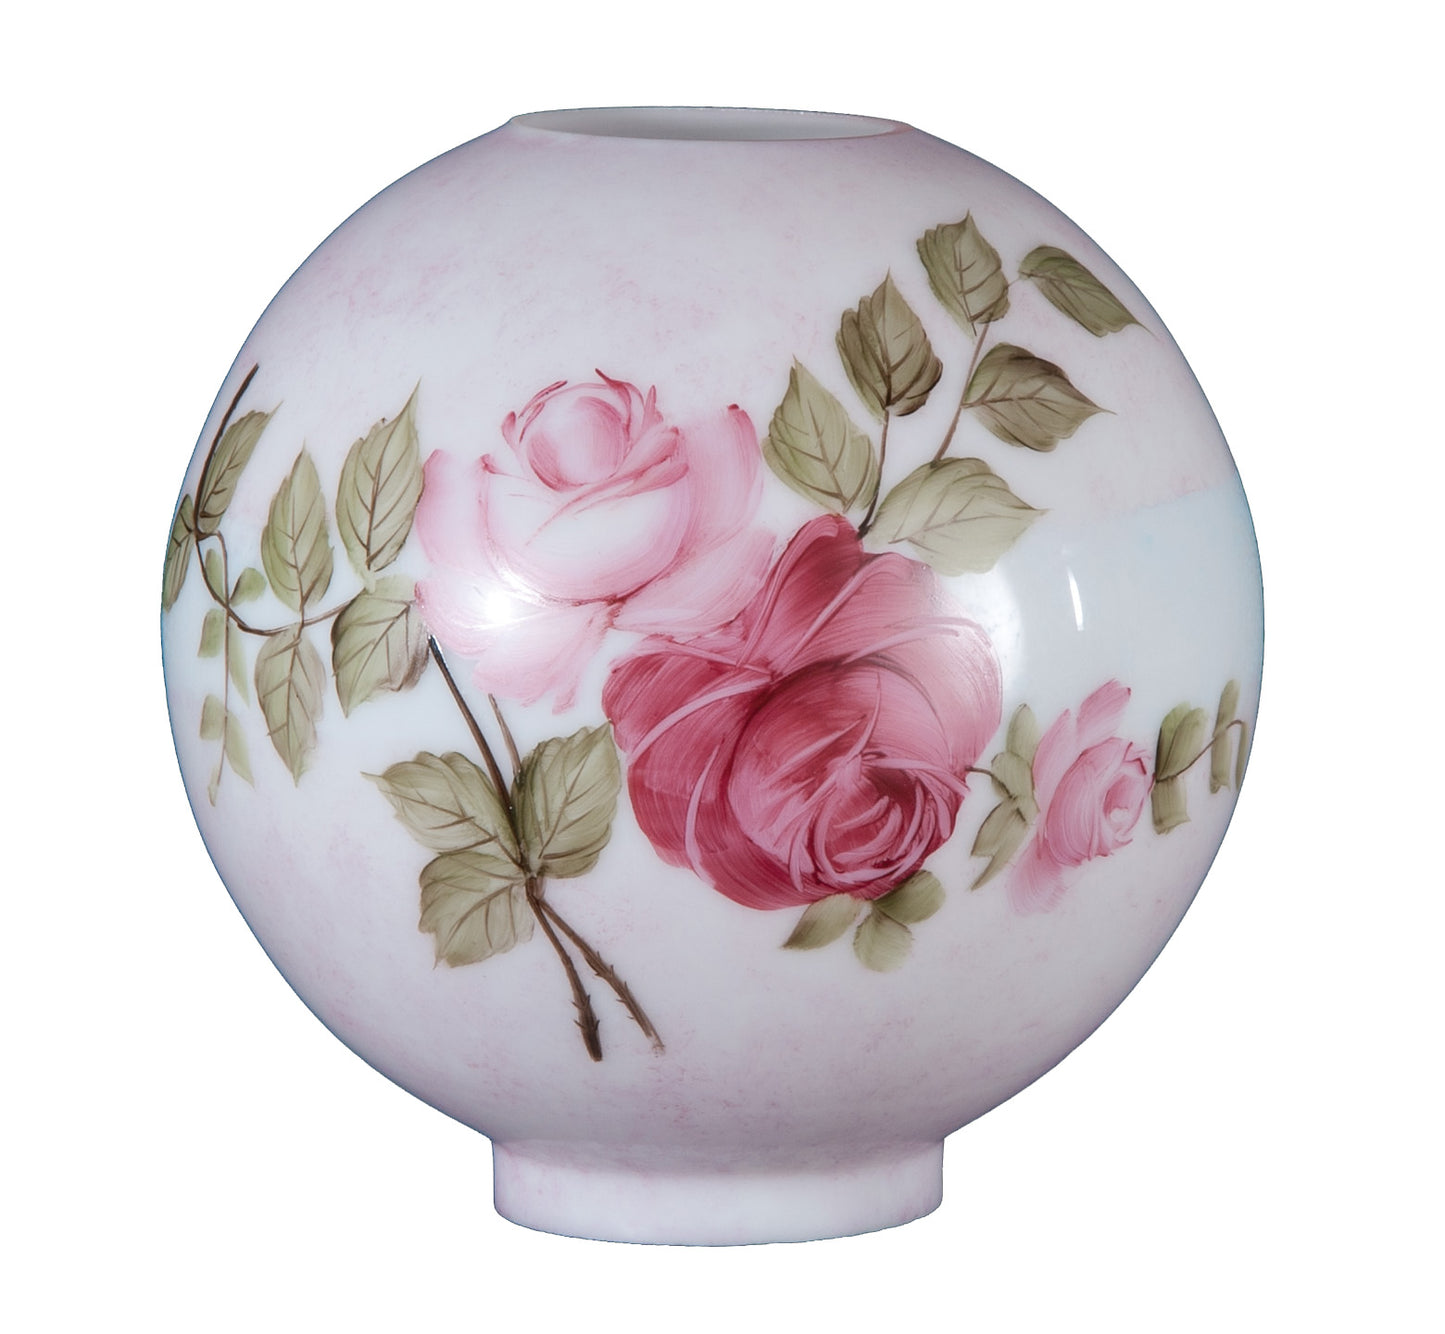 10 inch diameter Hand Painted Opal Glass Ball Lamp Shade, Queen Elizabeth Roses, 4 inch fitter